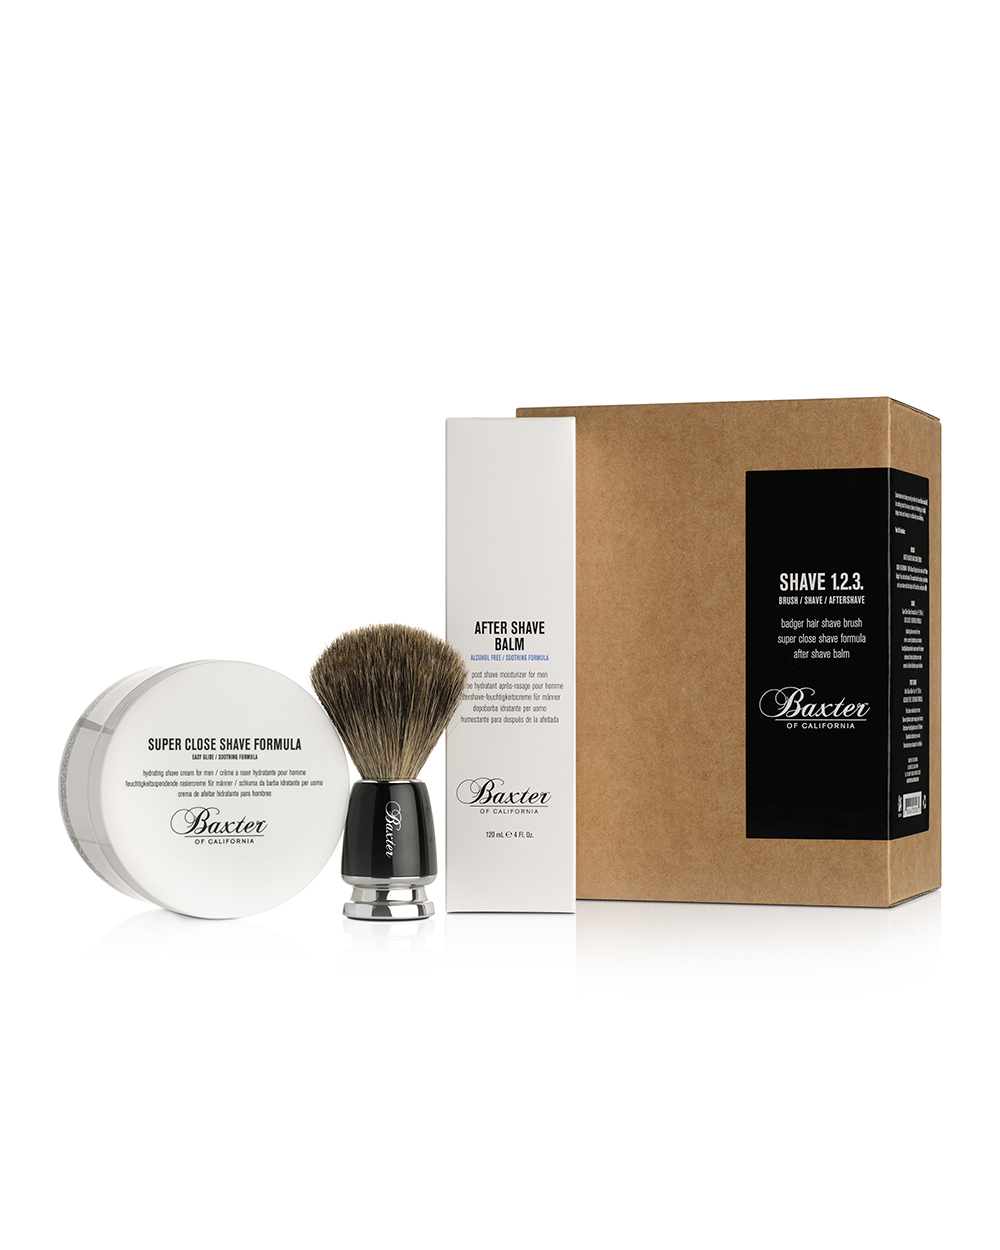 Baxter of California Shave 123 set, $129, from Barkers.